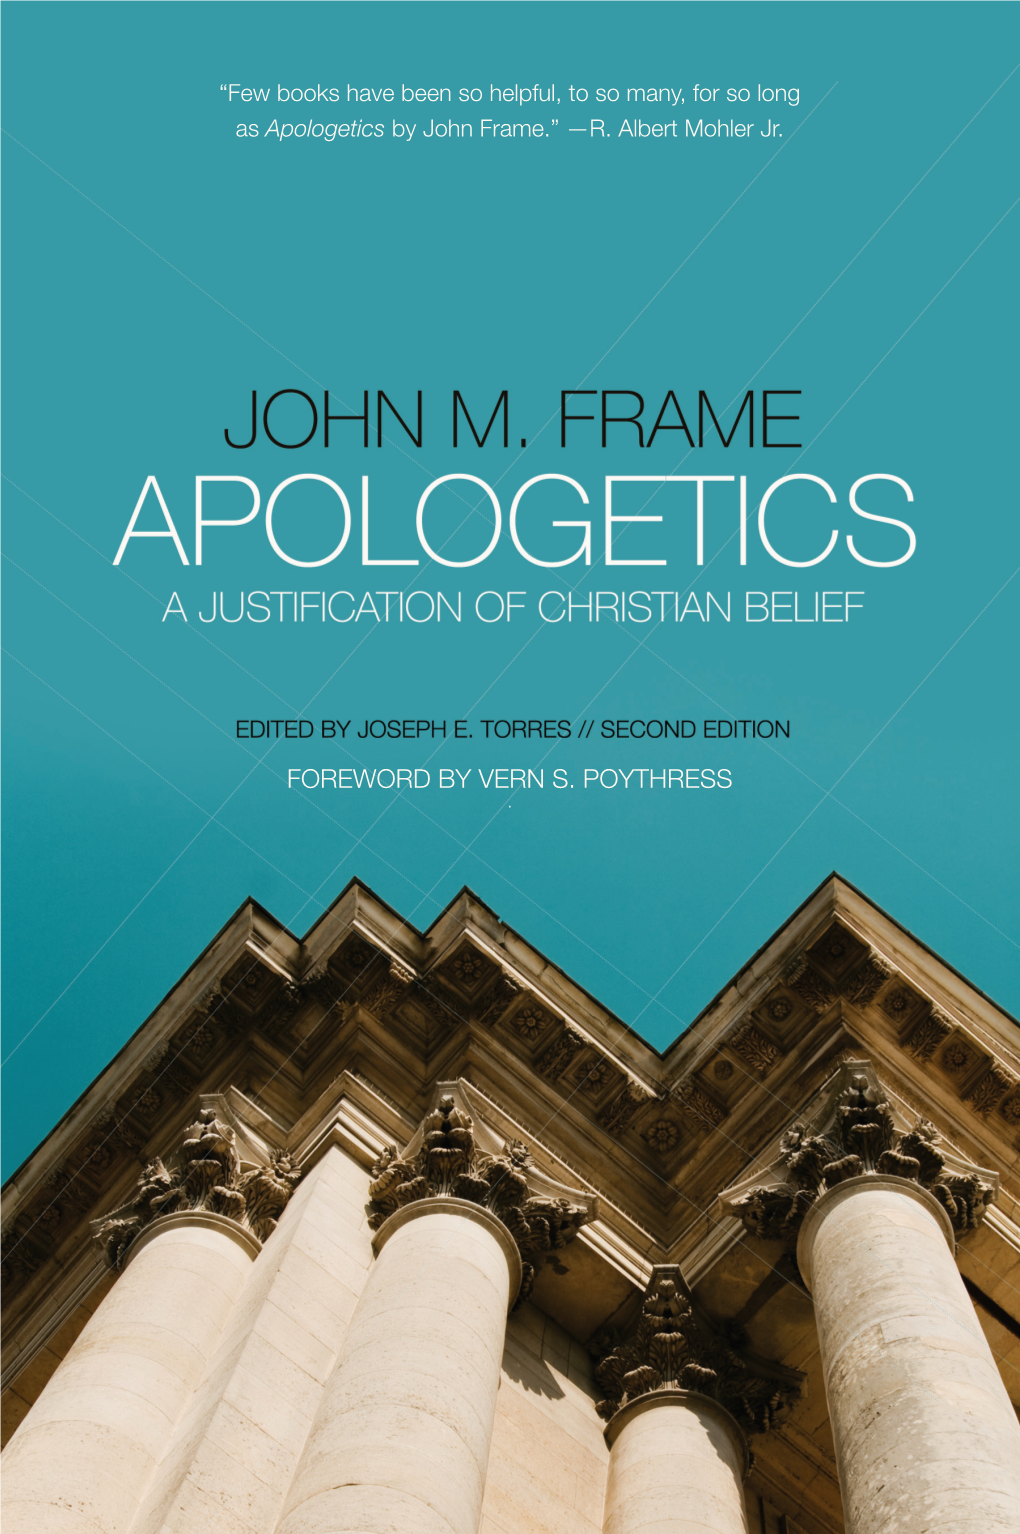 Frame Apologetics Cxs at Printer Proof Stage.Indd 1 5/21/15 4:42 PM Frame Apologetics Cxs at Printer Proof Stage.Indd 2 5/21/15 4:42 PM APOLOGETICS